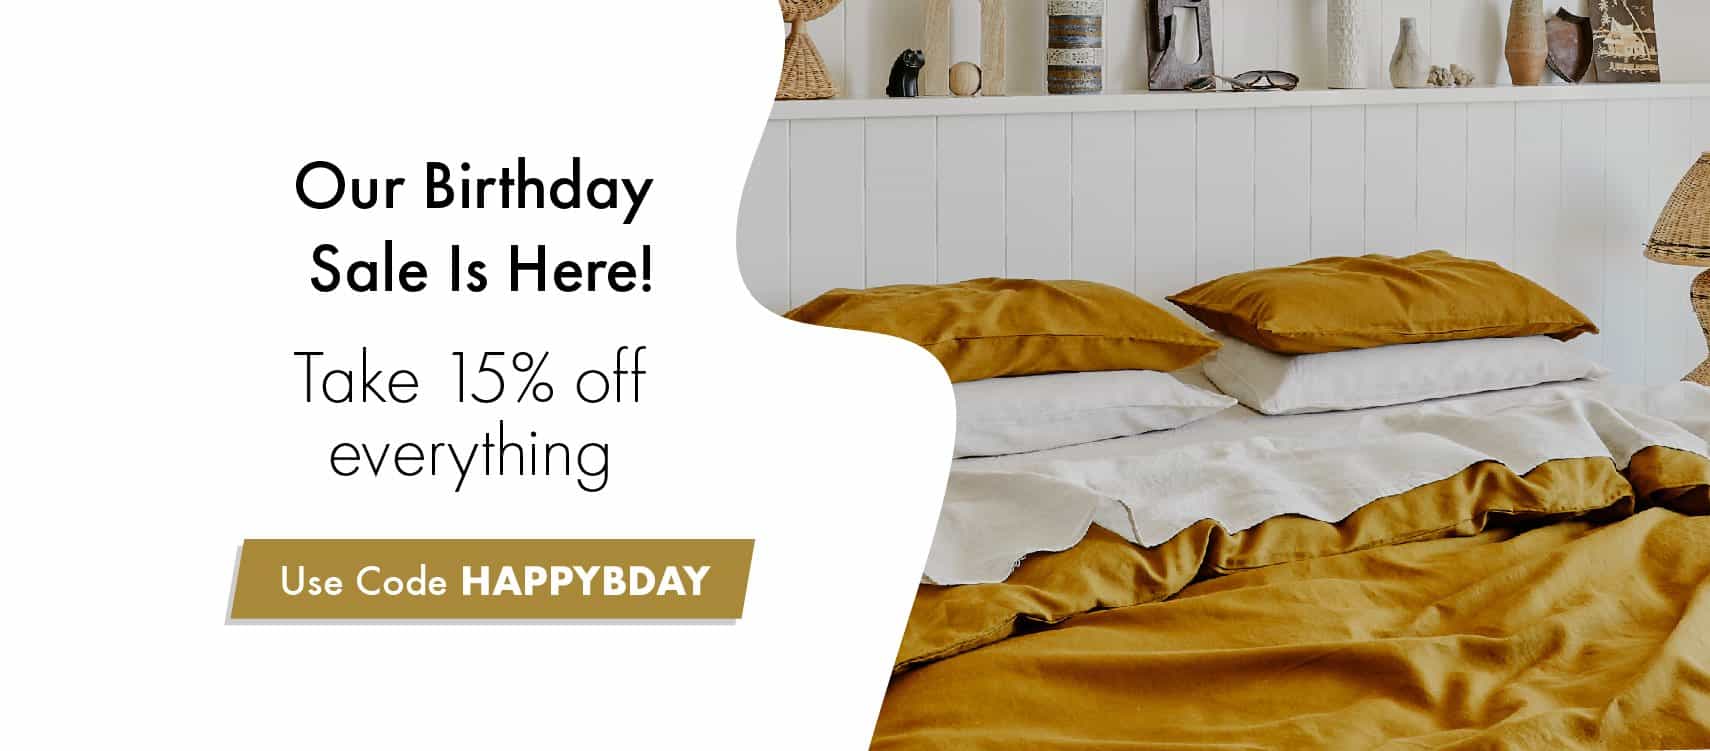 Extra 15% OFF on everything at Bed Threads